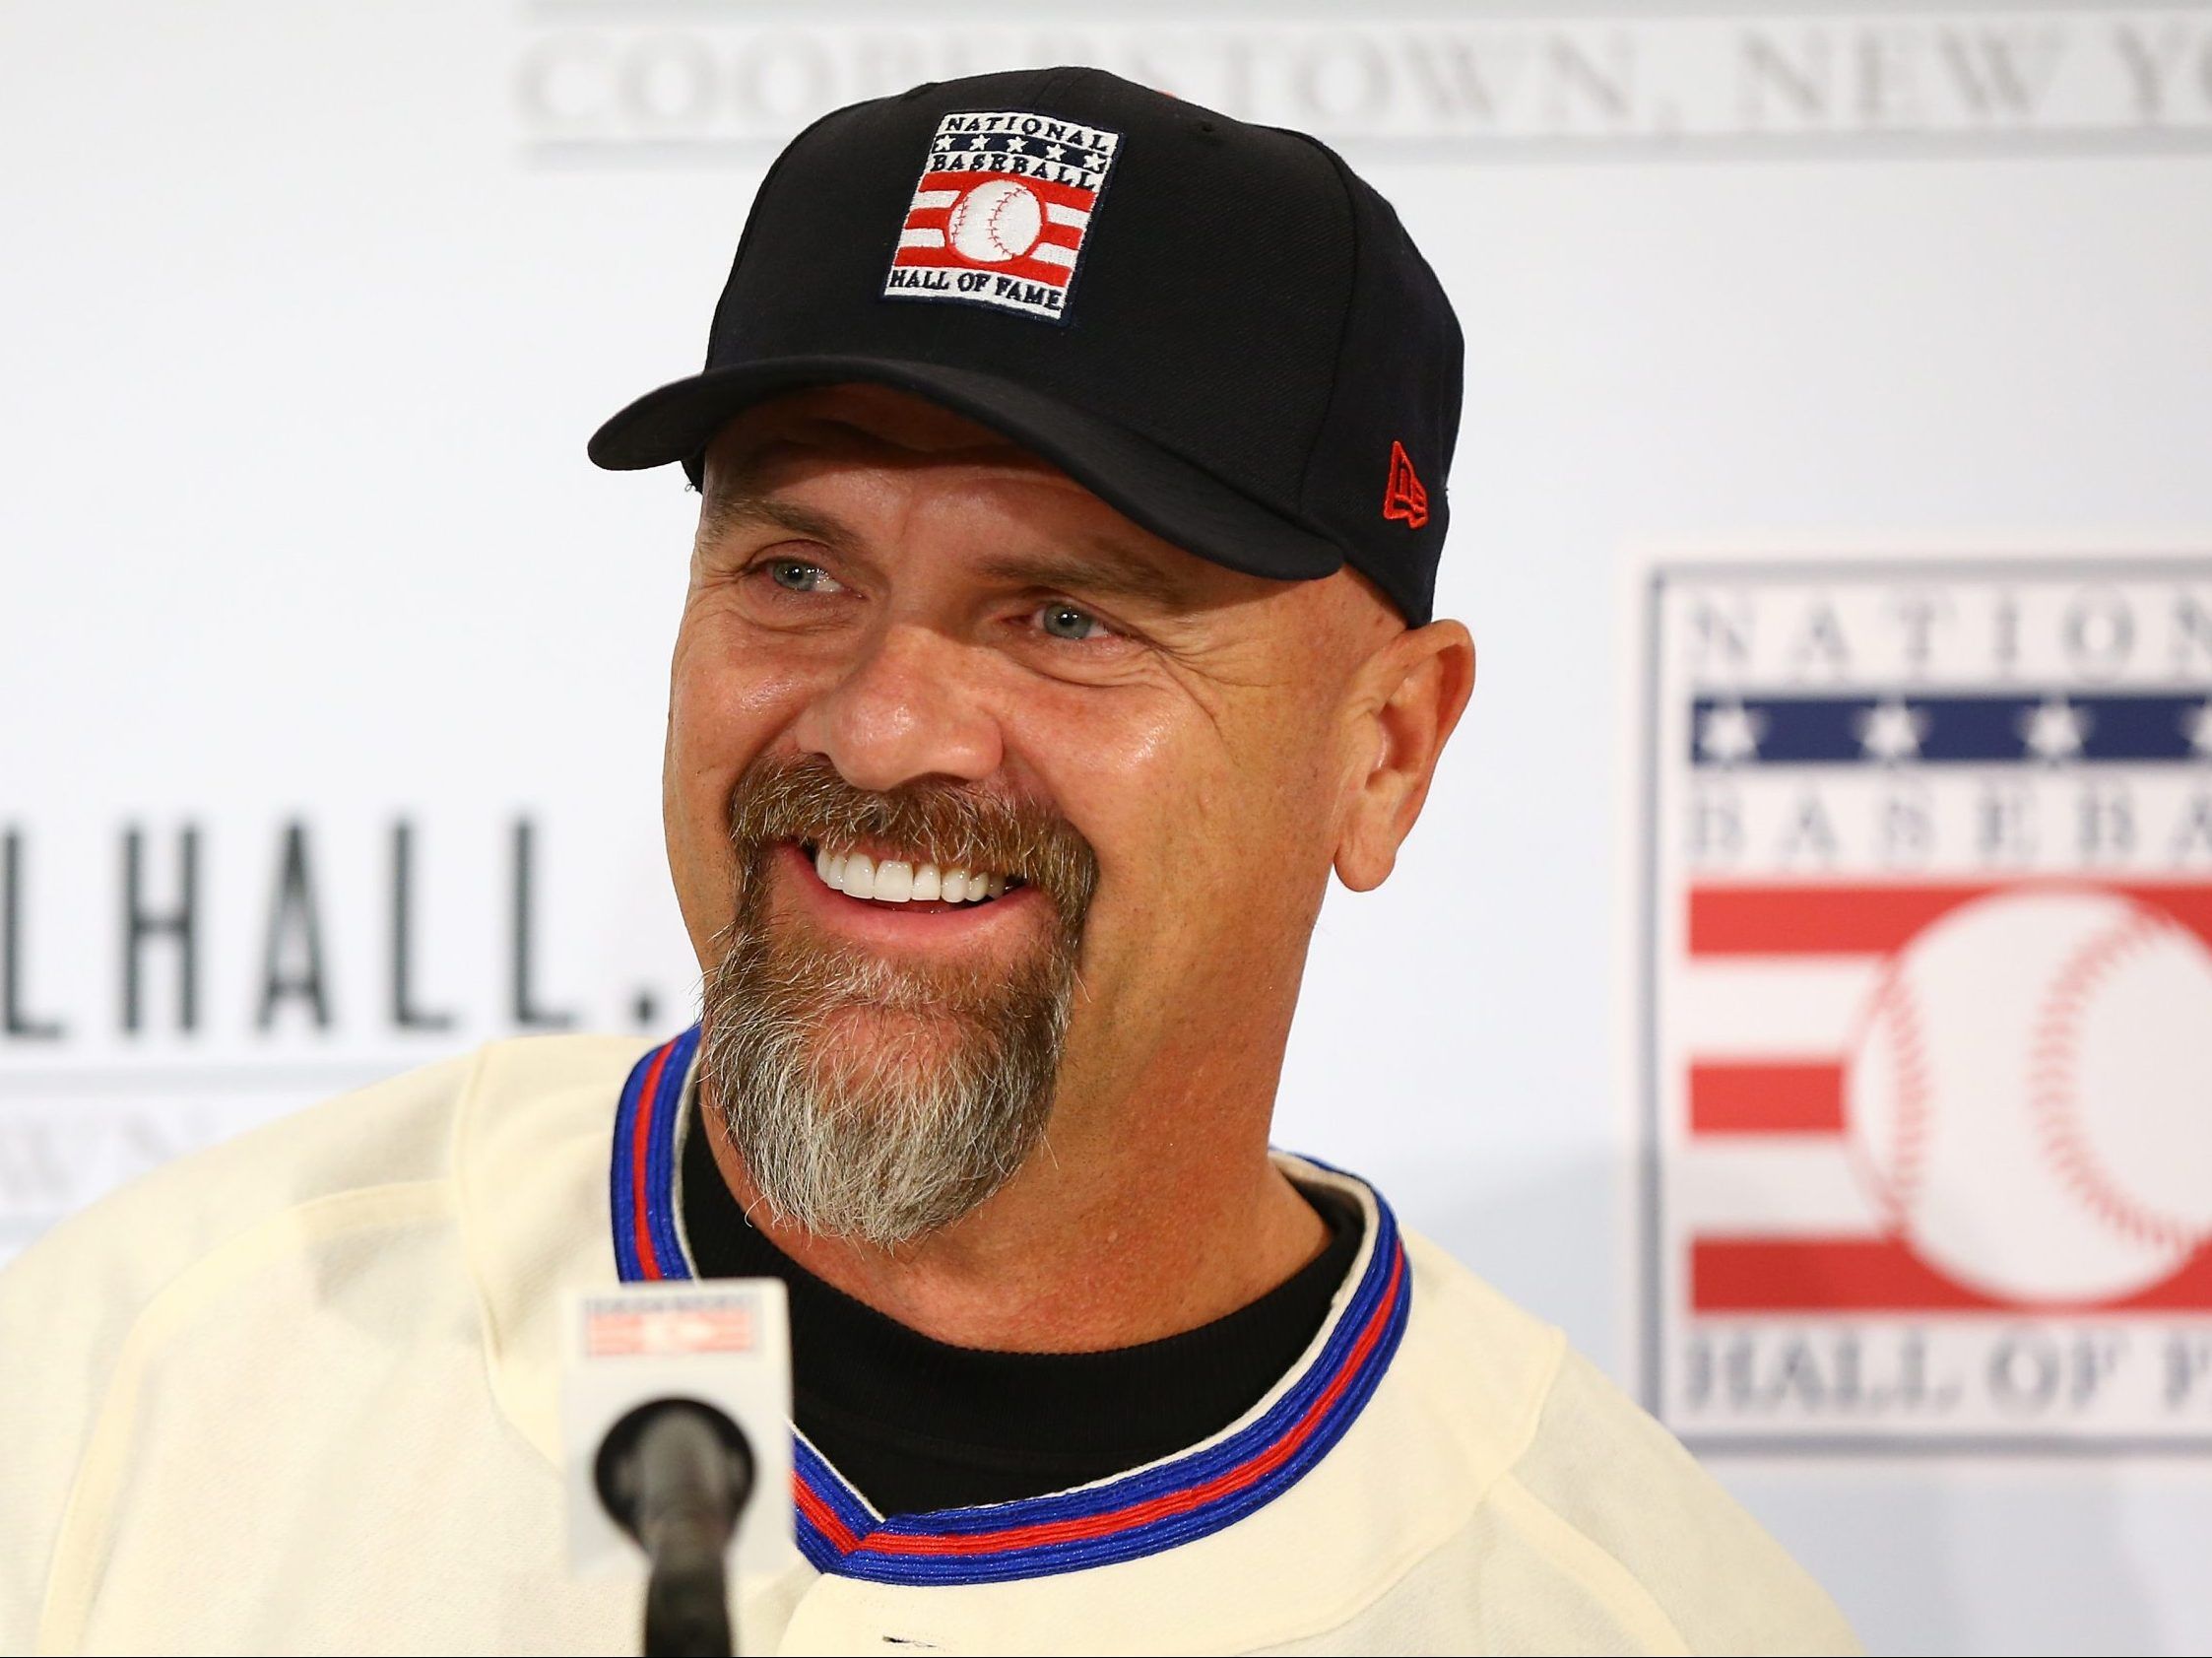 Former Expos, Rockies star Larry Walker being inducted into MLB Hall of Fame